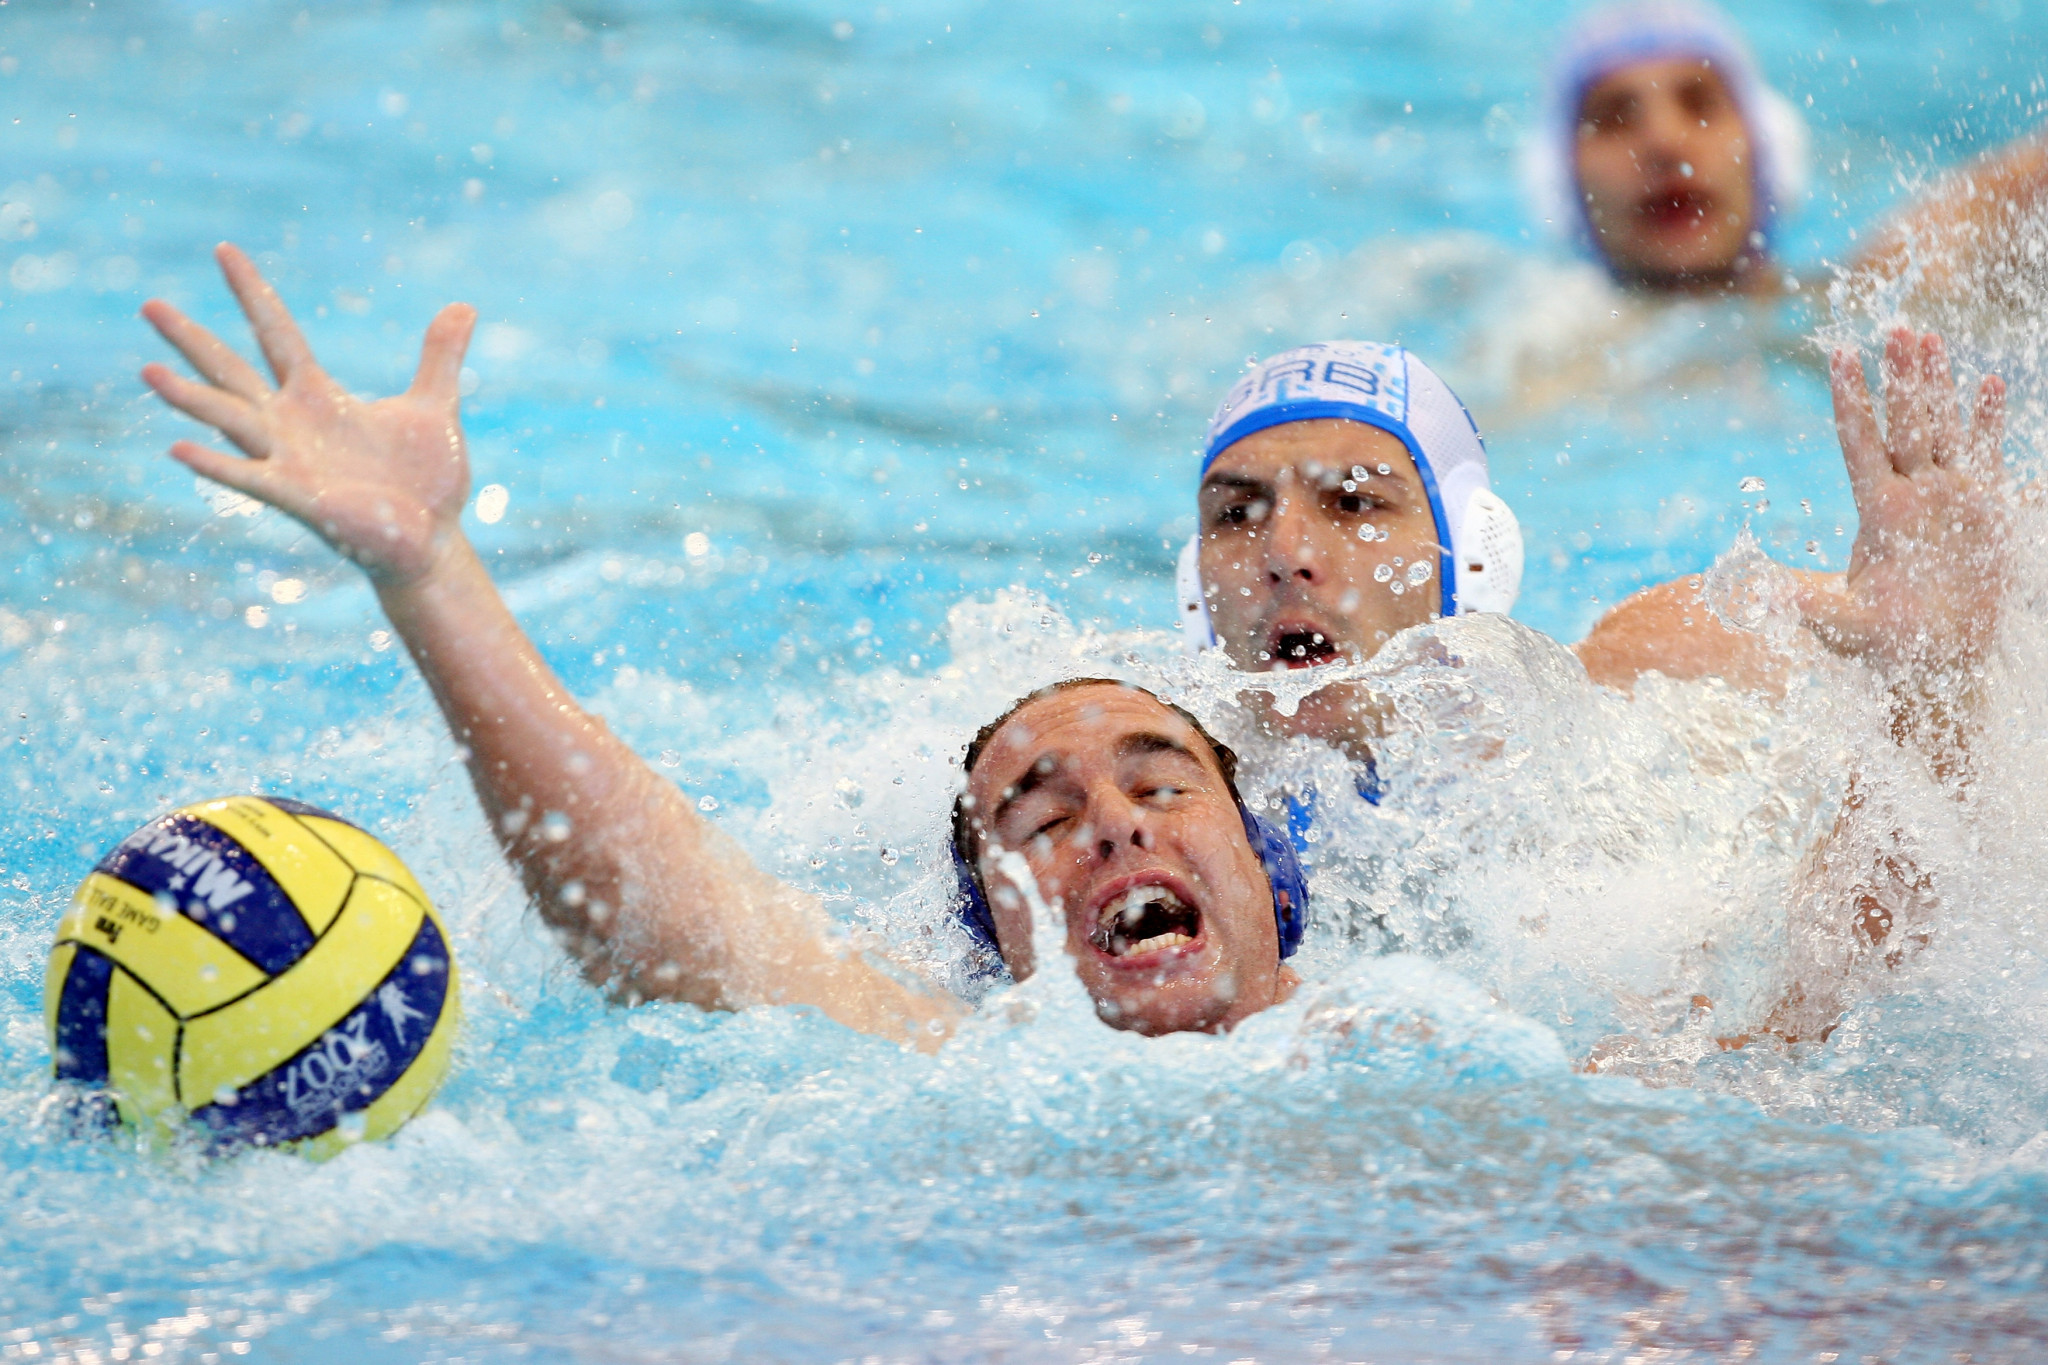 FINA vote to introduce video refereeing system and goal-line technology to water polo